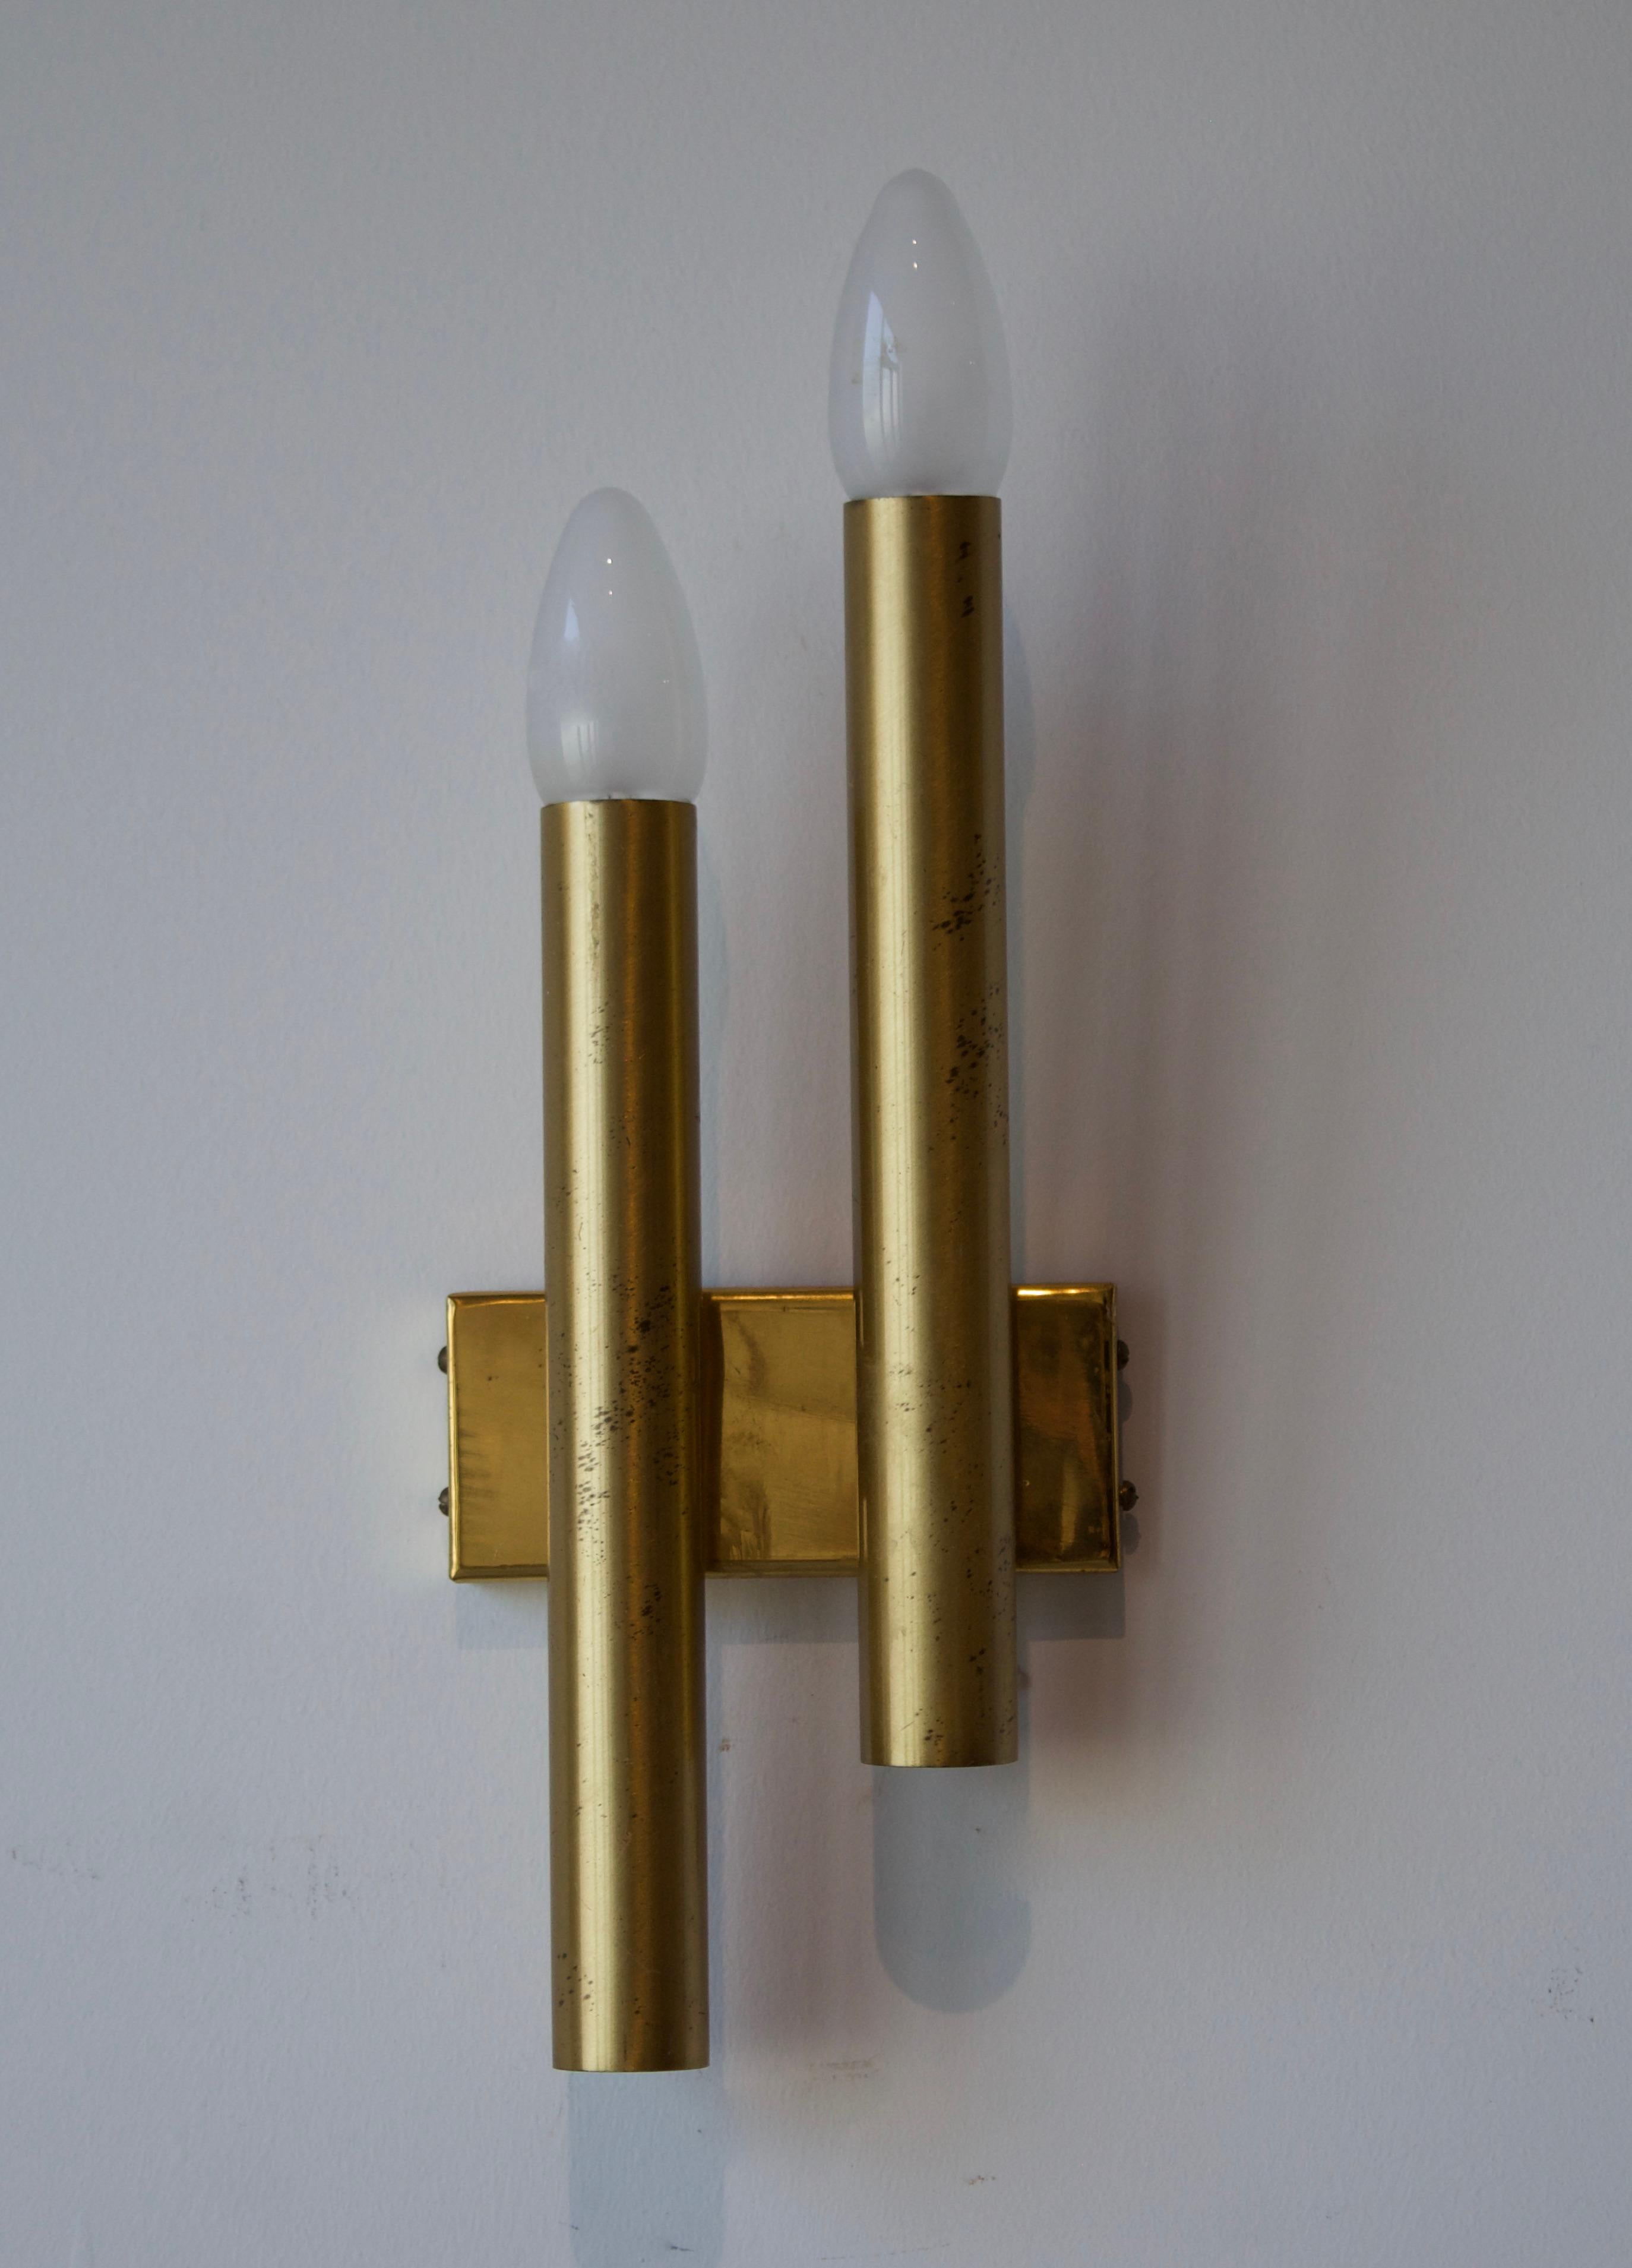 A pair of two-armed wall lights. Designed and produced in Italy, 1960s. Produced by Candle, Italy.

Other designers of the period include Paavo Tynell, Jean Royère, Hans Bergström, Hans-Agne Jakobsson, and Kaare Klint.